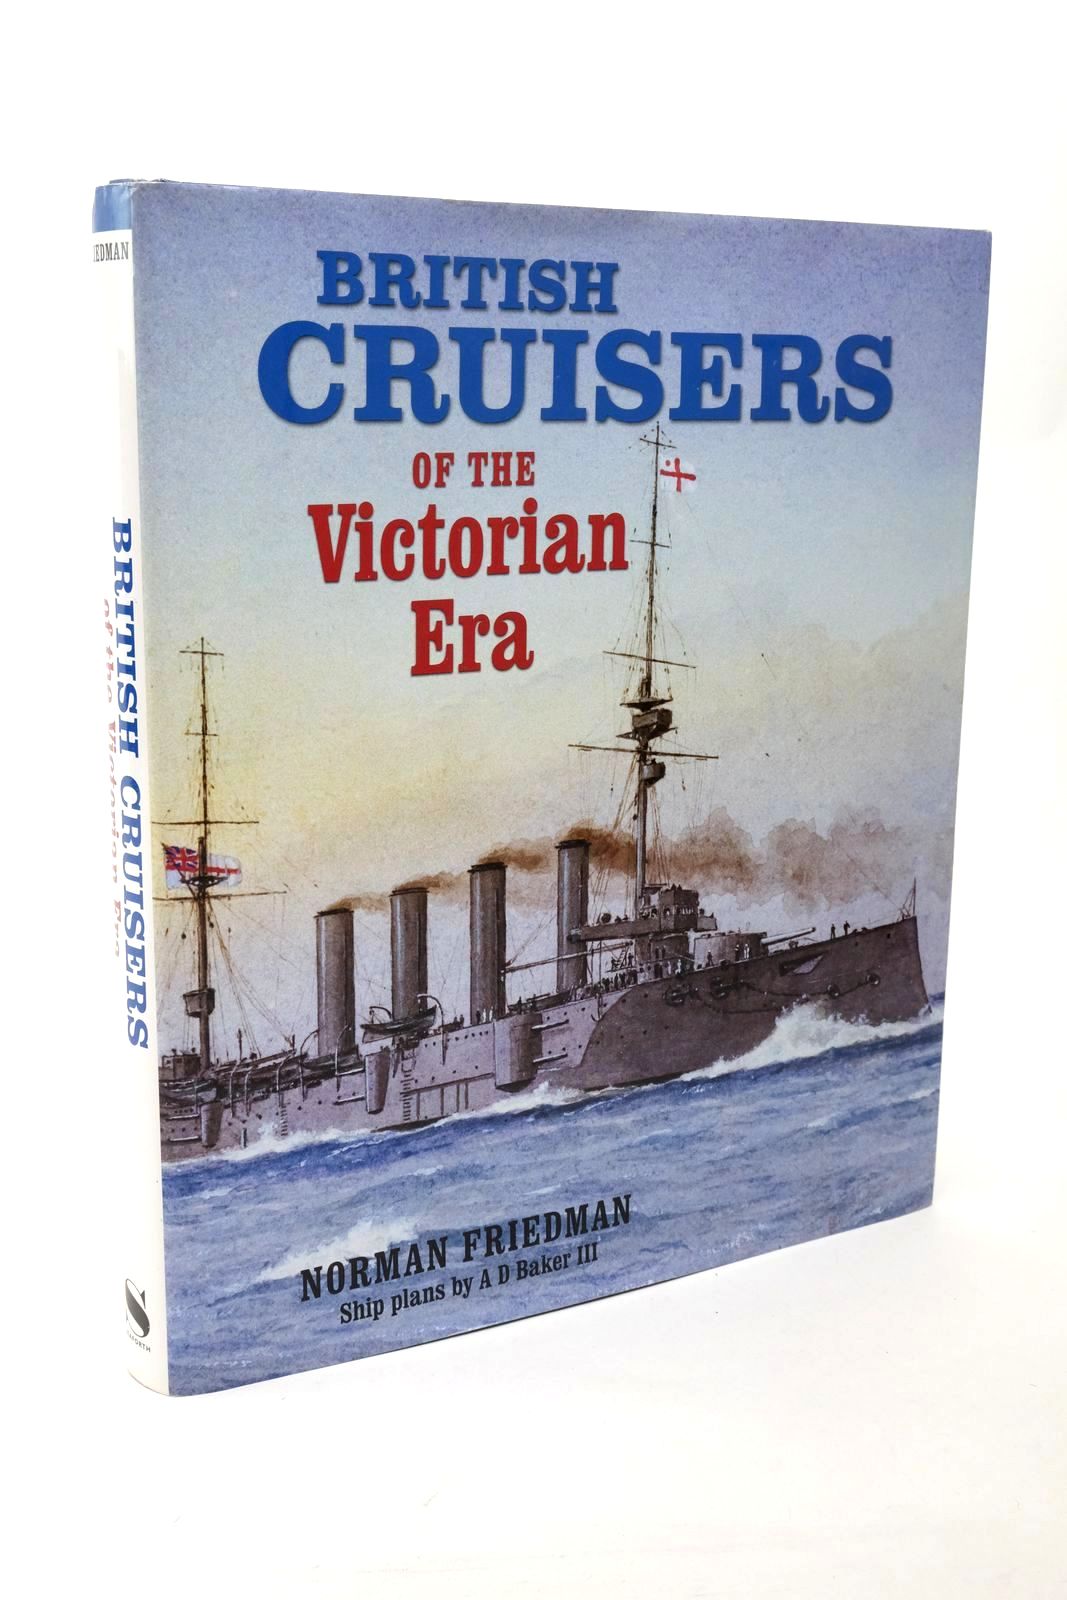 Photo of BRITISH CRUISERS OF THE VICTORIAN ERA written by Friedman, Norman illustrated by Baker, A.D. Webb, Paul published by Seaforth (STOCK CODE: 1322588)  for sale by Stella & Rose's Books